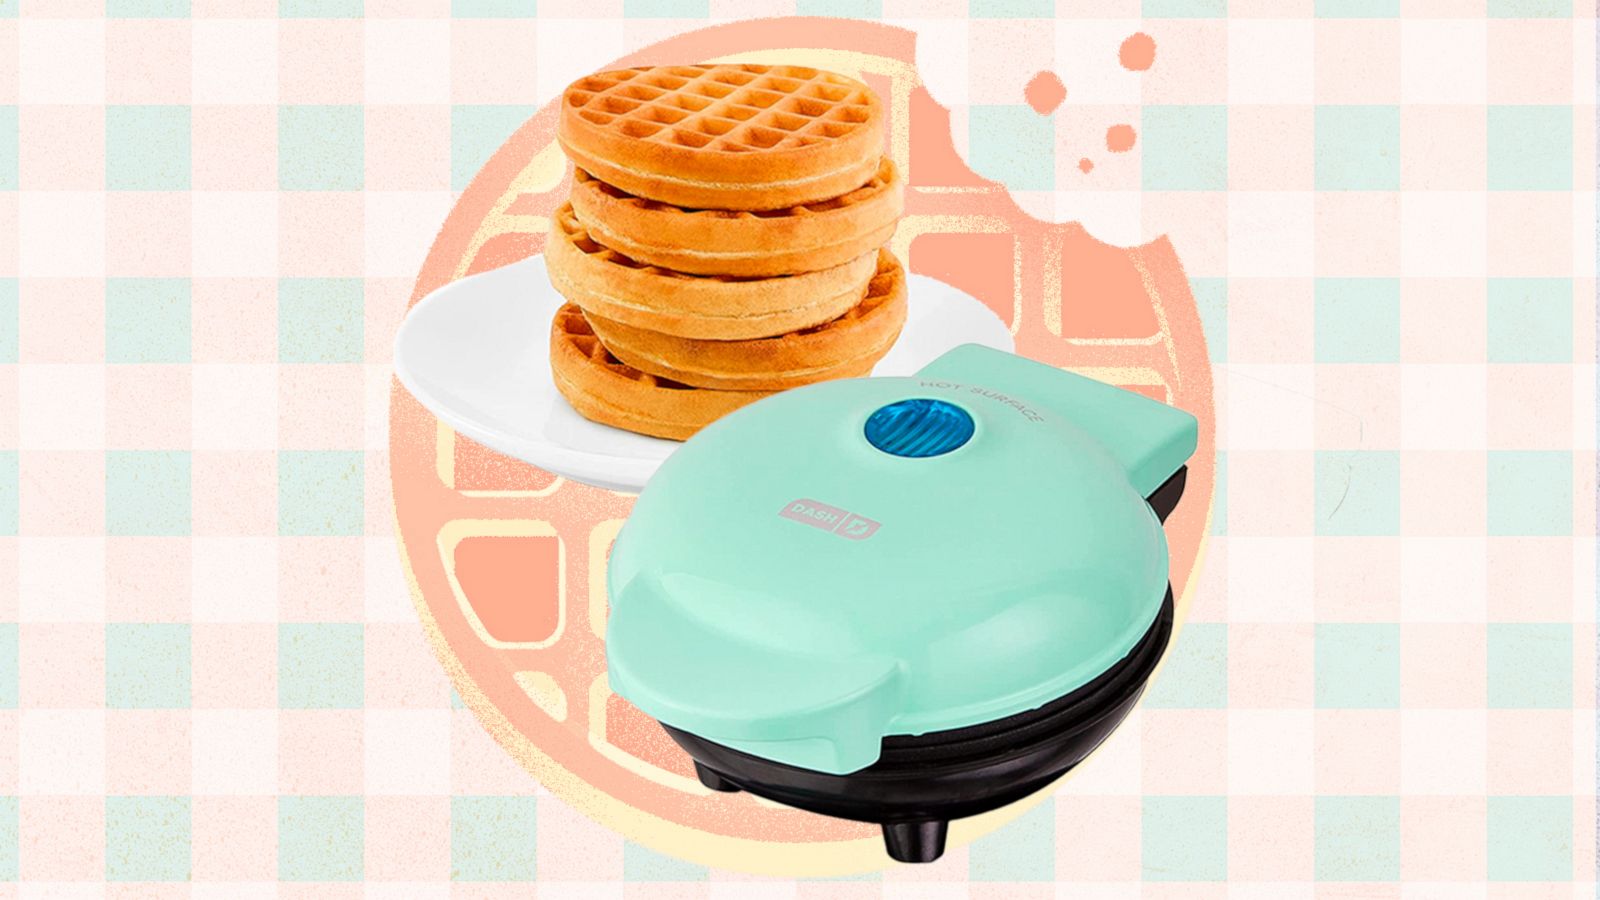 Shop this No. 1 bestselling waffle iron for under $10 - Good Morning America